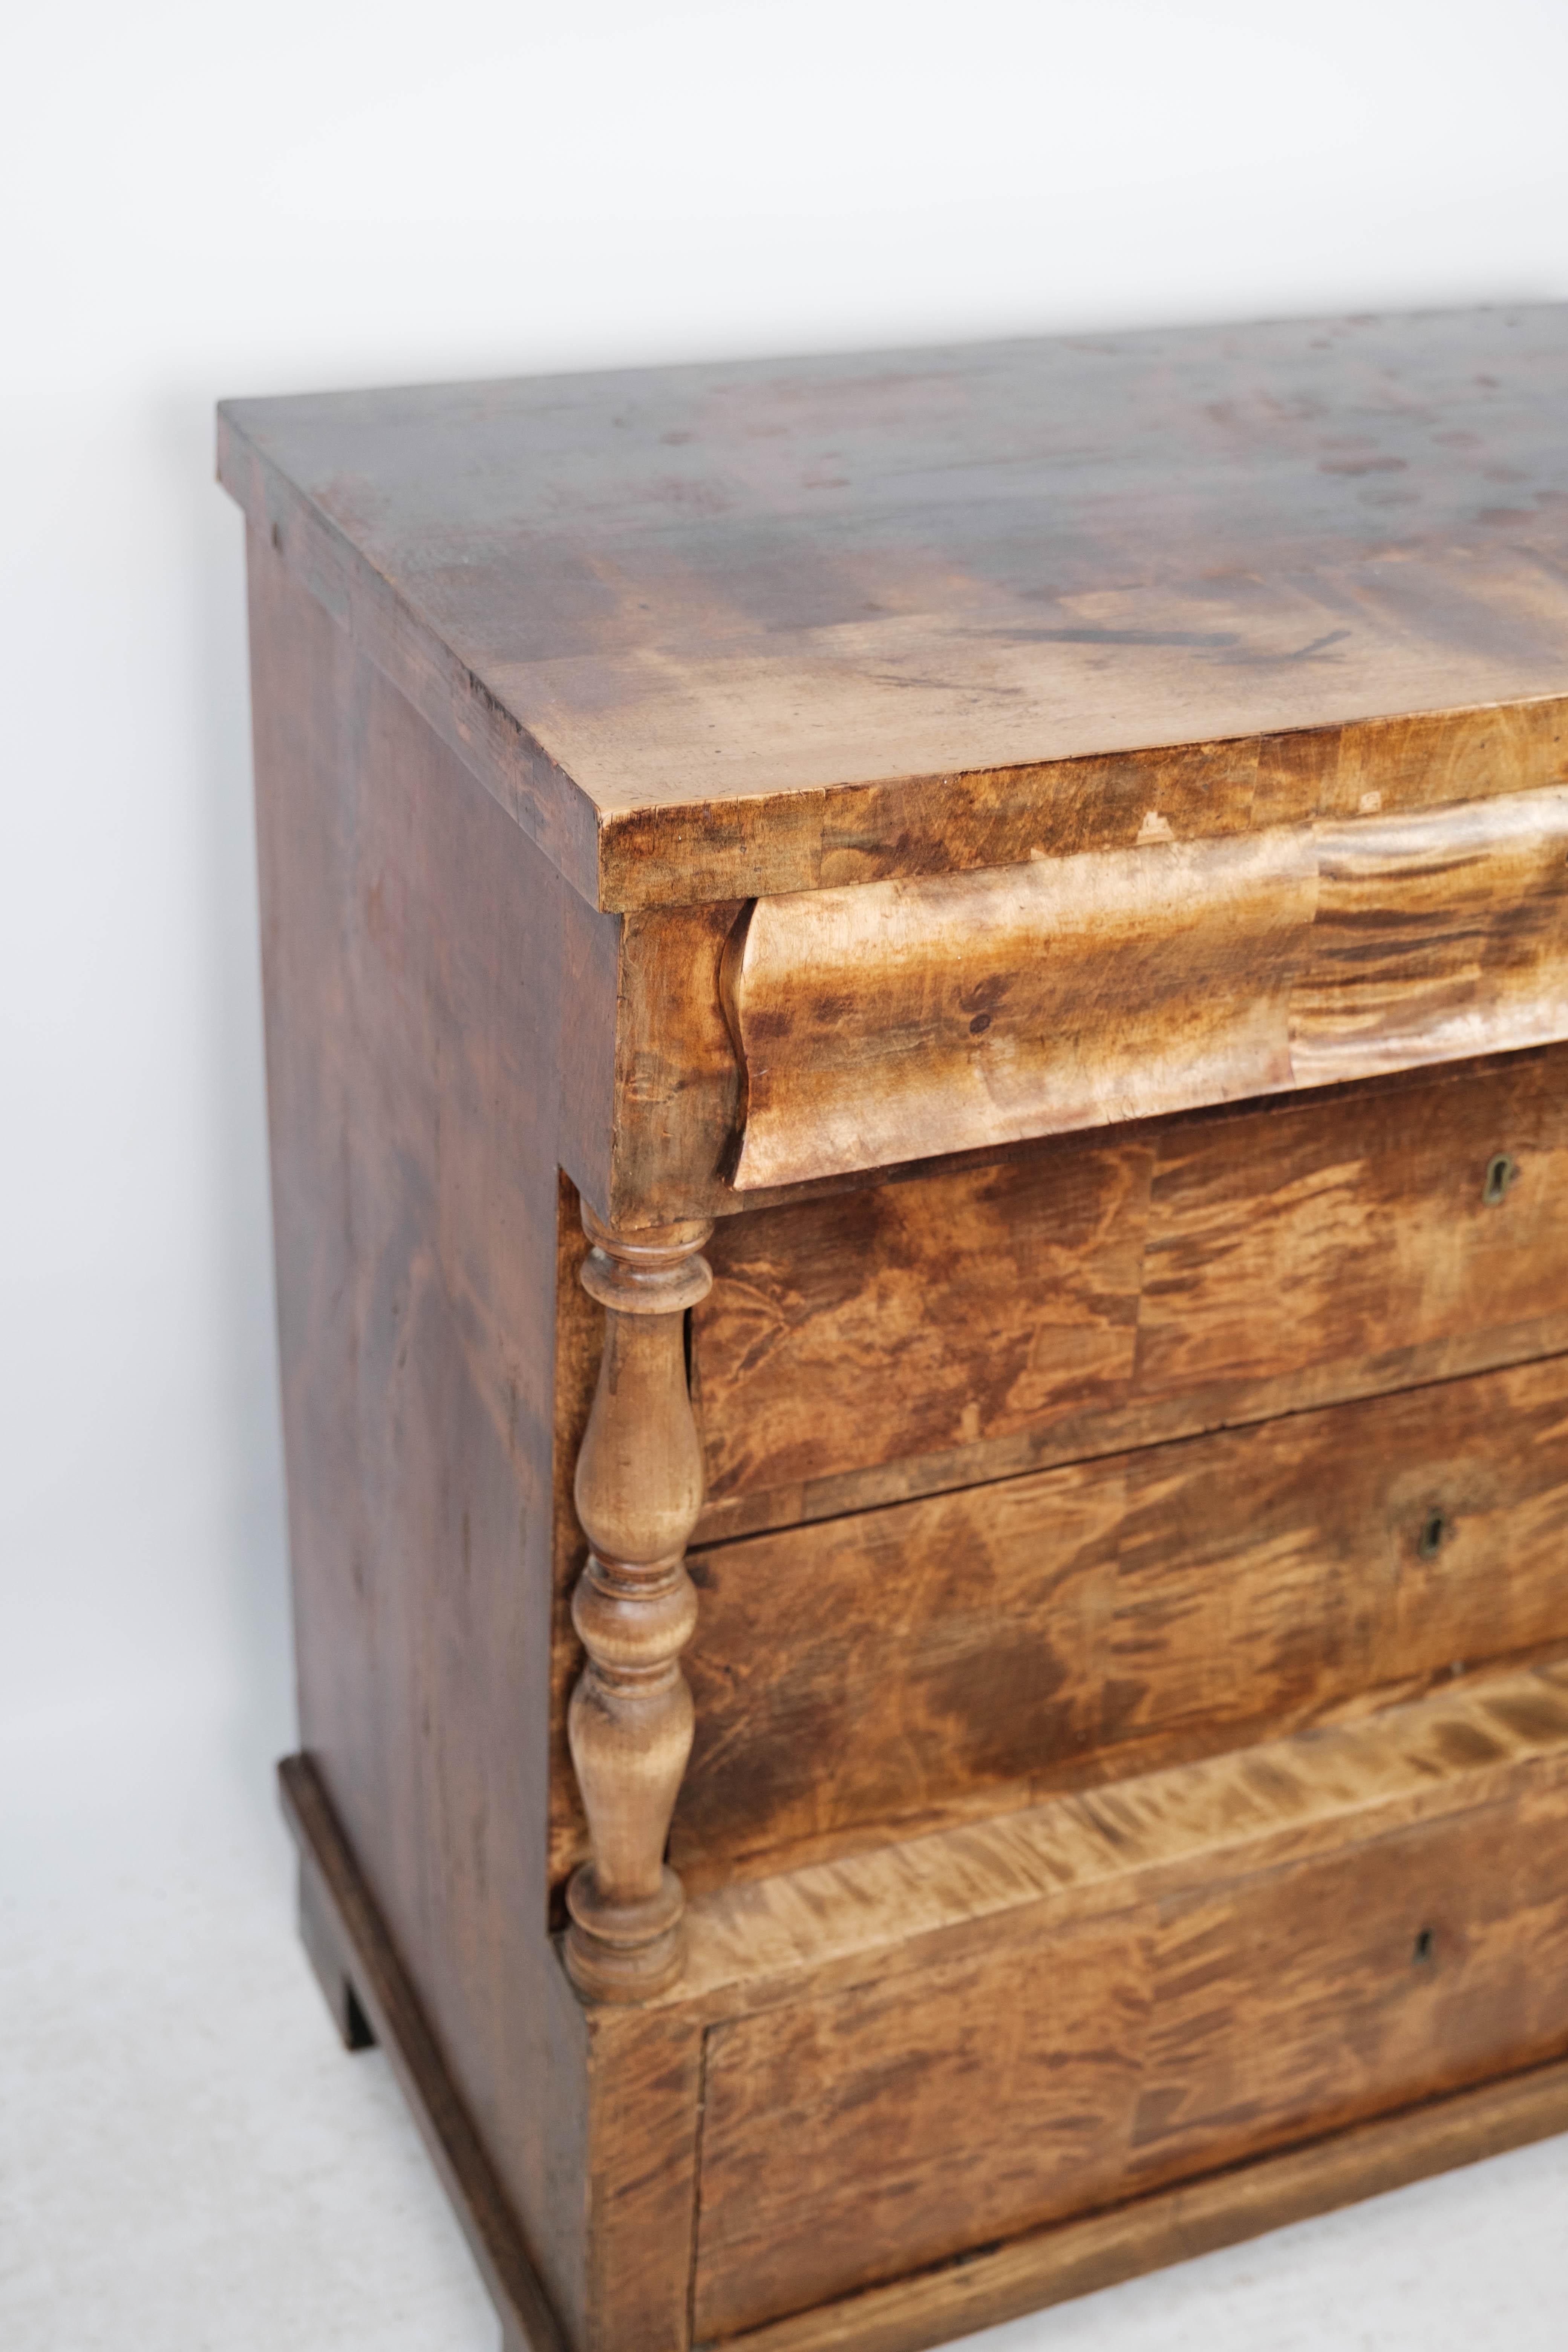 Danish Late Empire Chest of Drawers of Birch Wood from around the 1840s